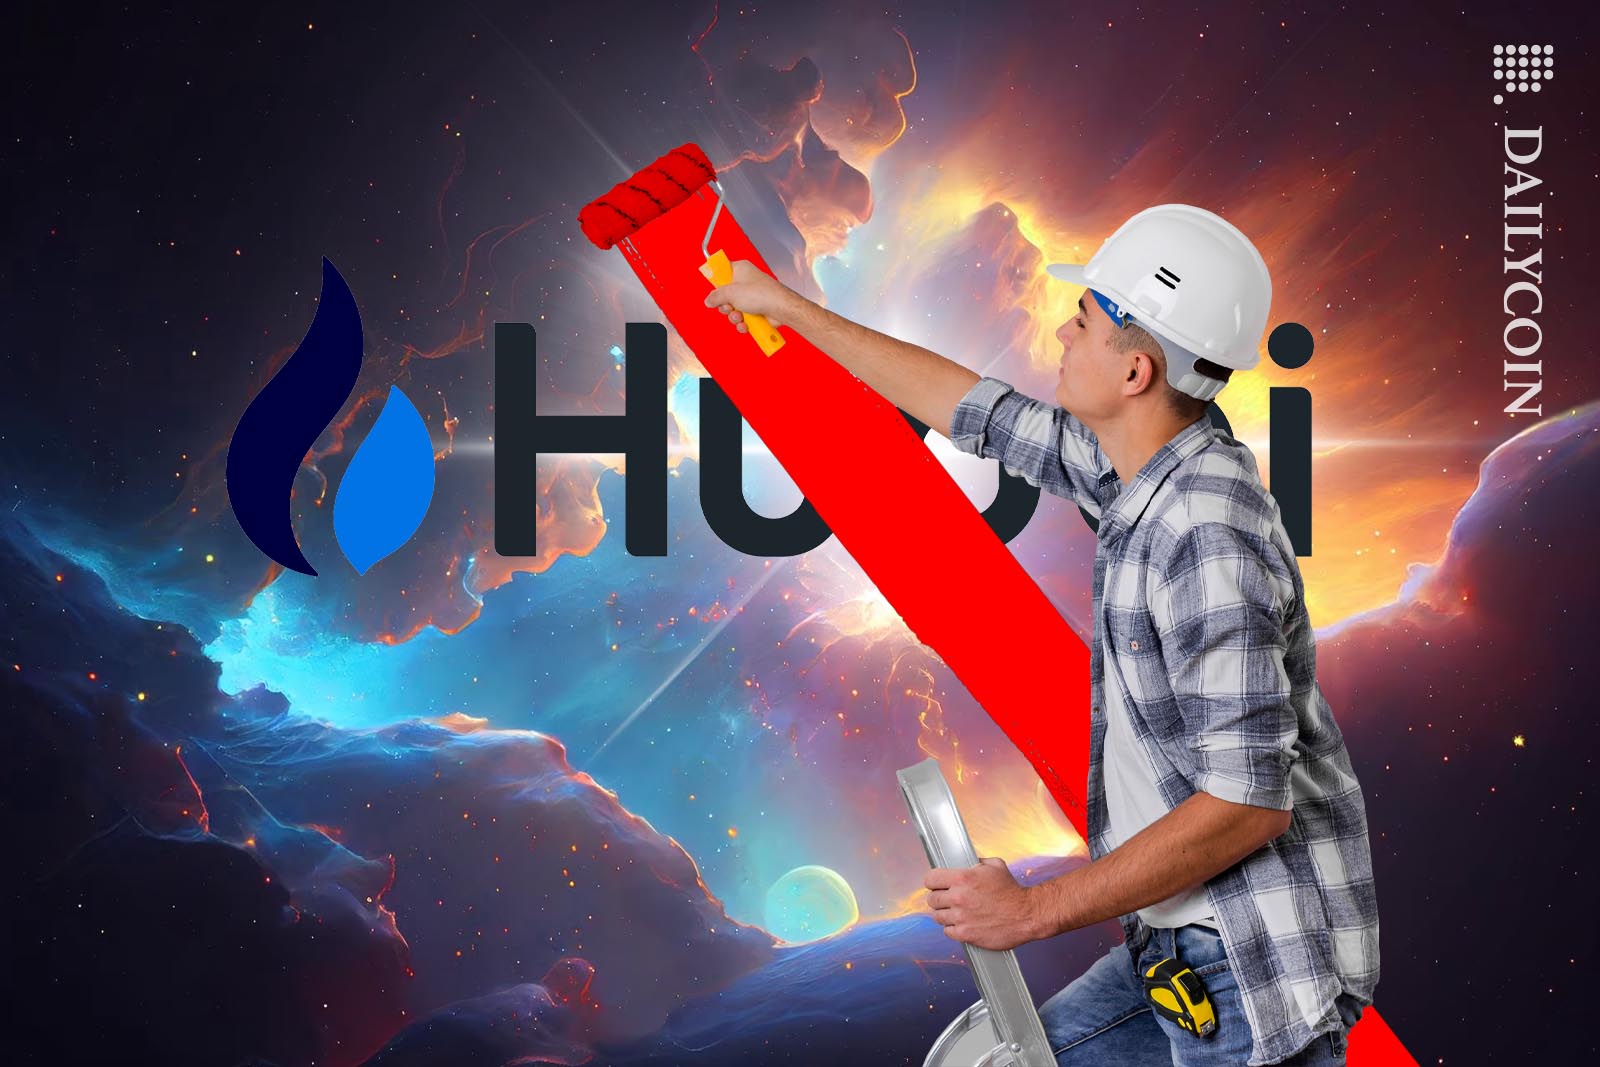 Man wearing a hard hat painting over an old Huobi logi in space.